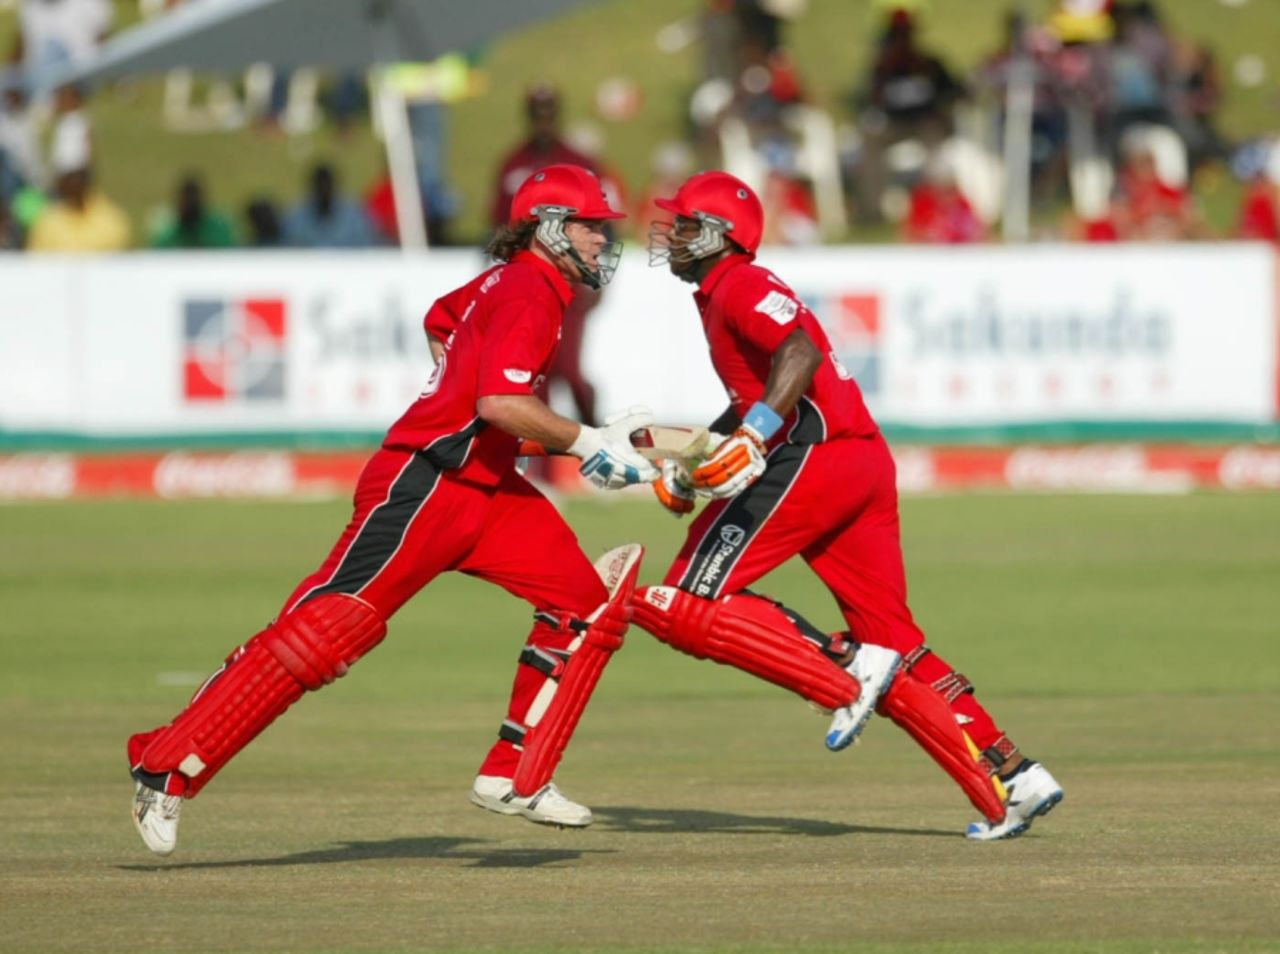 Lou Vincent and Vusi Sibanda put on 139 for the third wicket, Mid West Rhinos v Southern Rocks, Stanbic Bank 20 Series, Harare, November 20, 2010